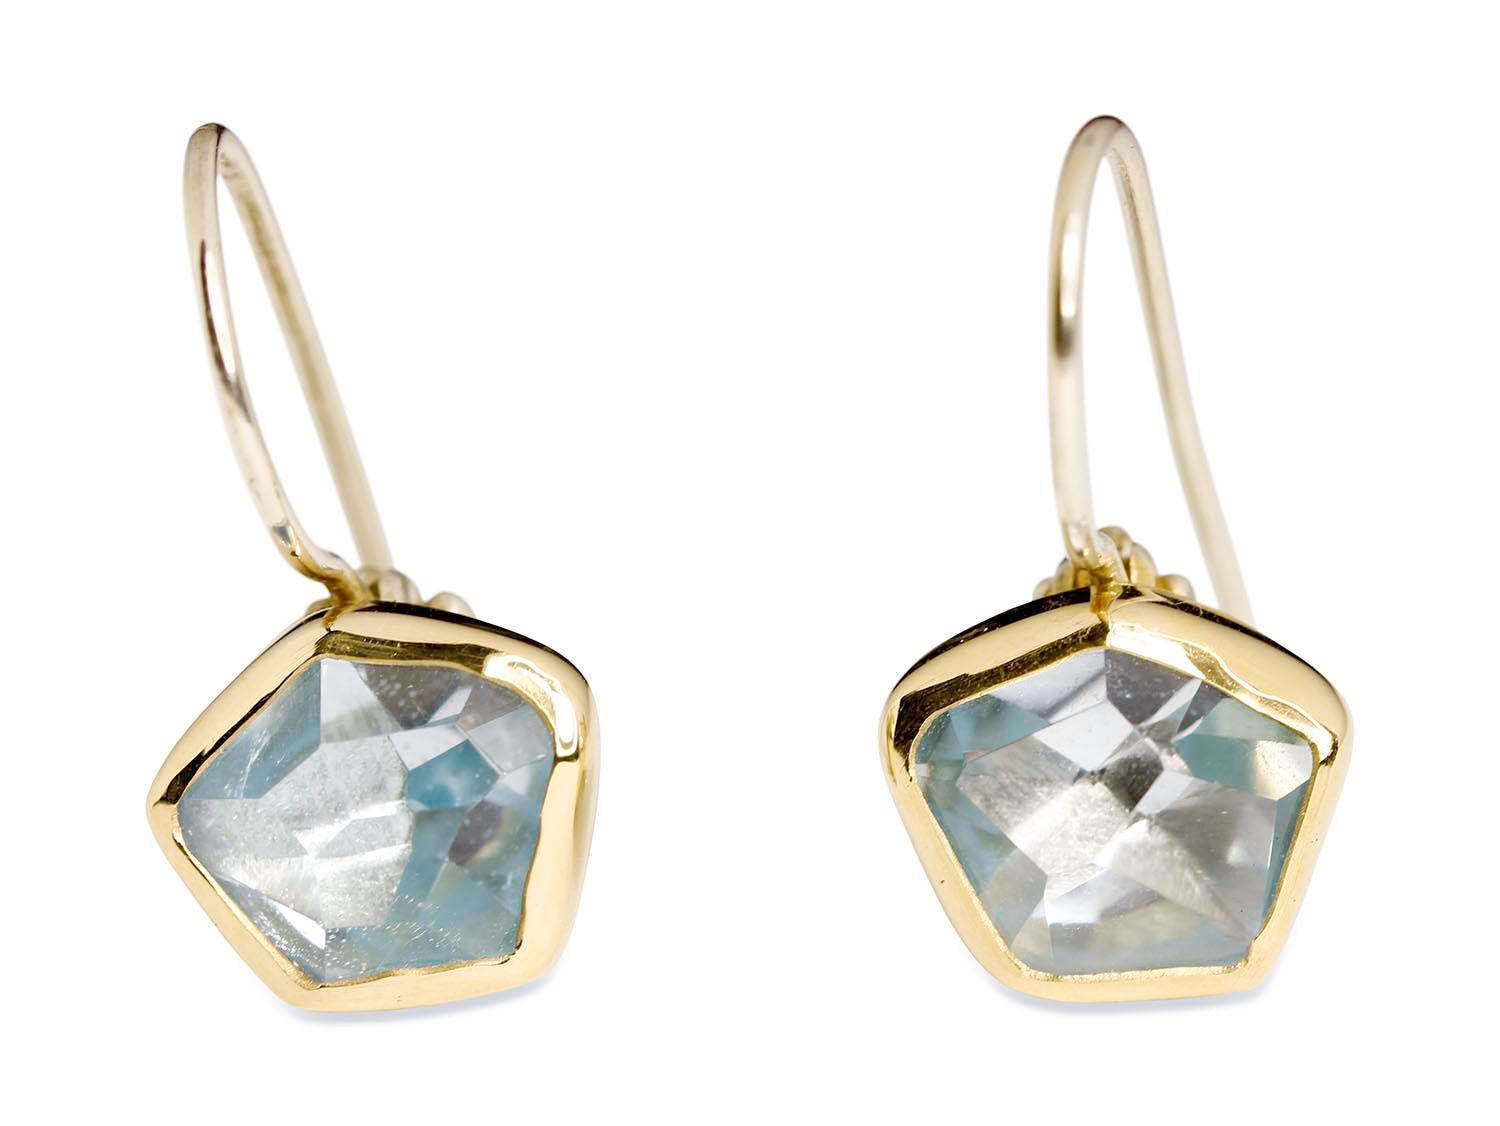 ﻿Bezel Set Aquamarine Earrings in 18K Yellow Gold and Sterling Silver